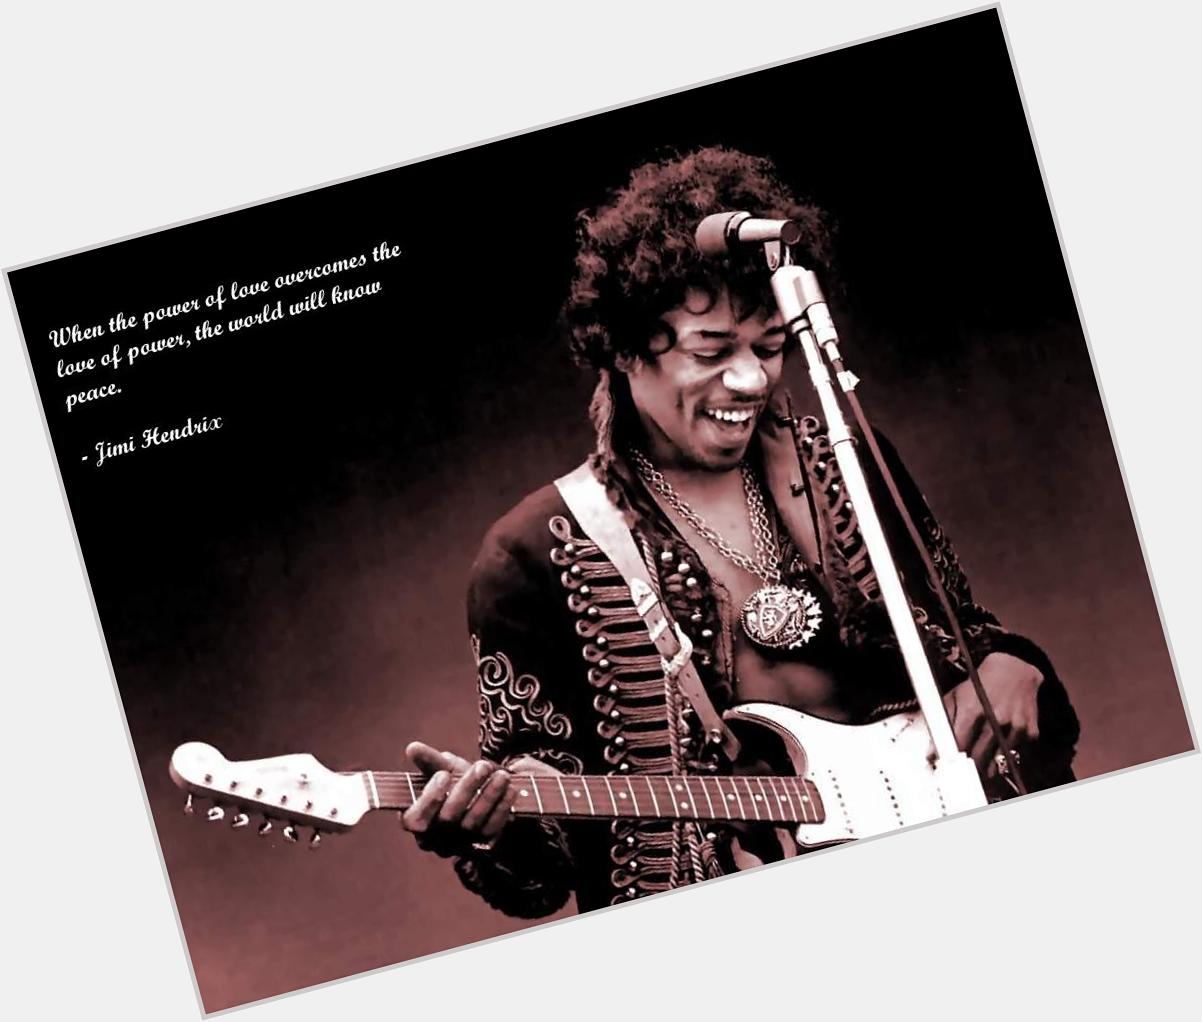 Happy 72nd Birthday to the one and only Jimi Hendrix!!! One of the greatest guitarists ever Rest in peace 